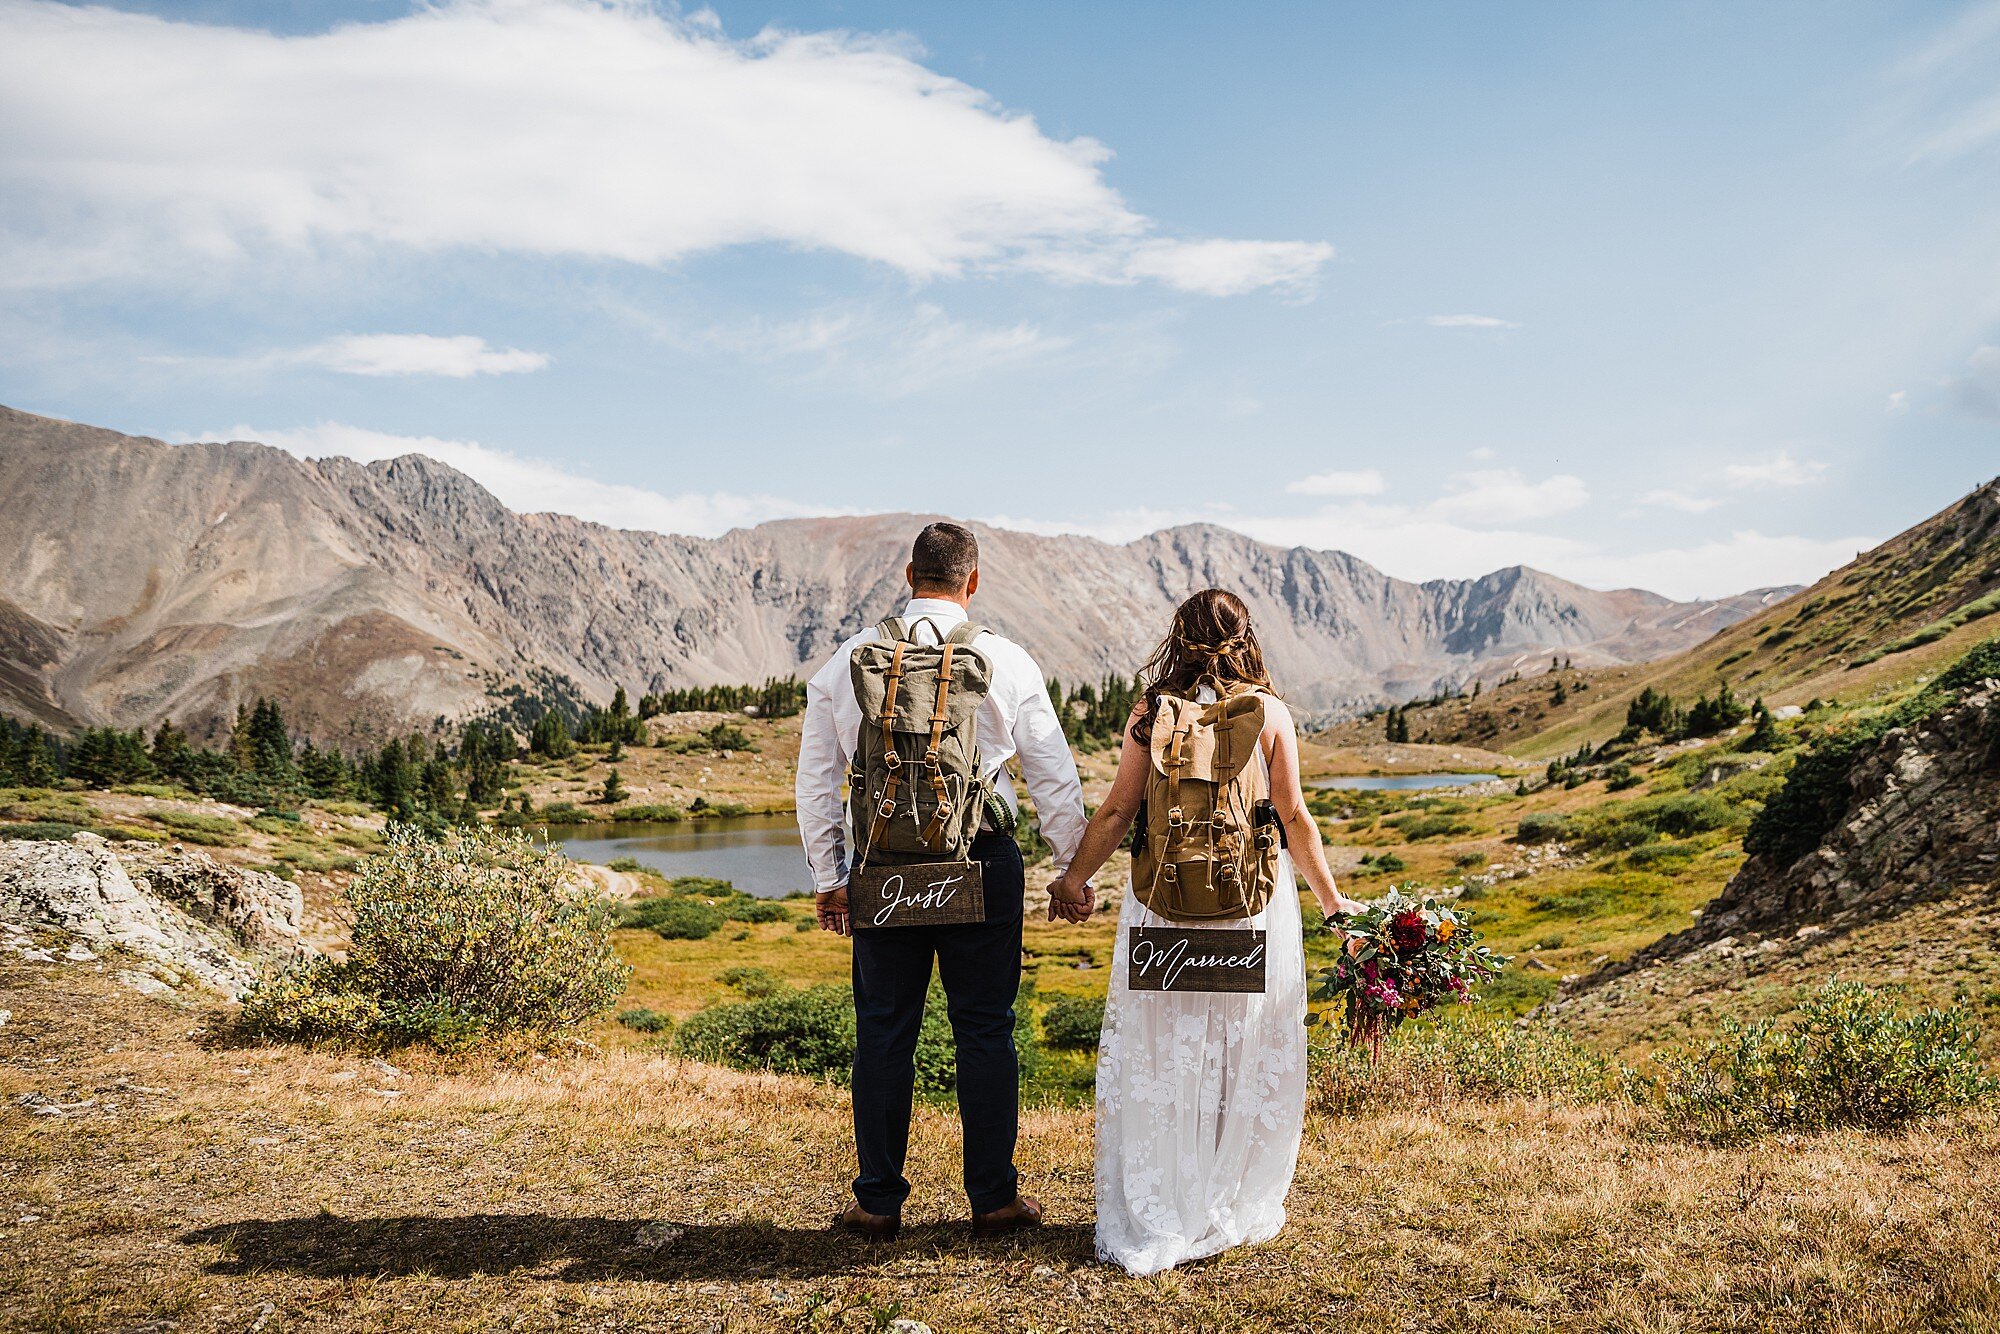 Alpine Lake and Forest Elopement in Breckenridge | Colorado Elopement Photographer | Vow of the Wild